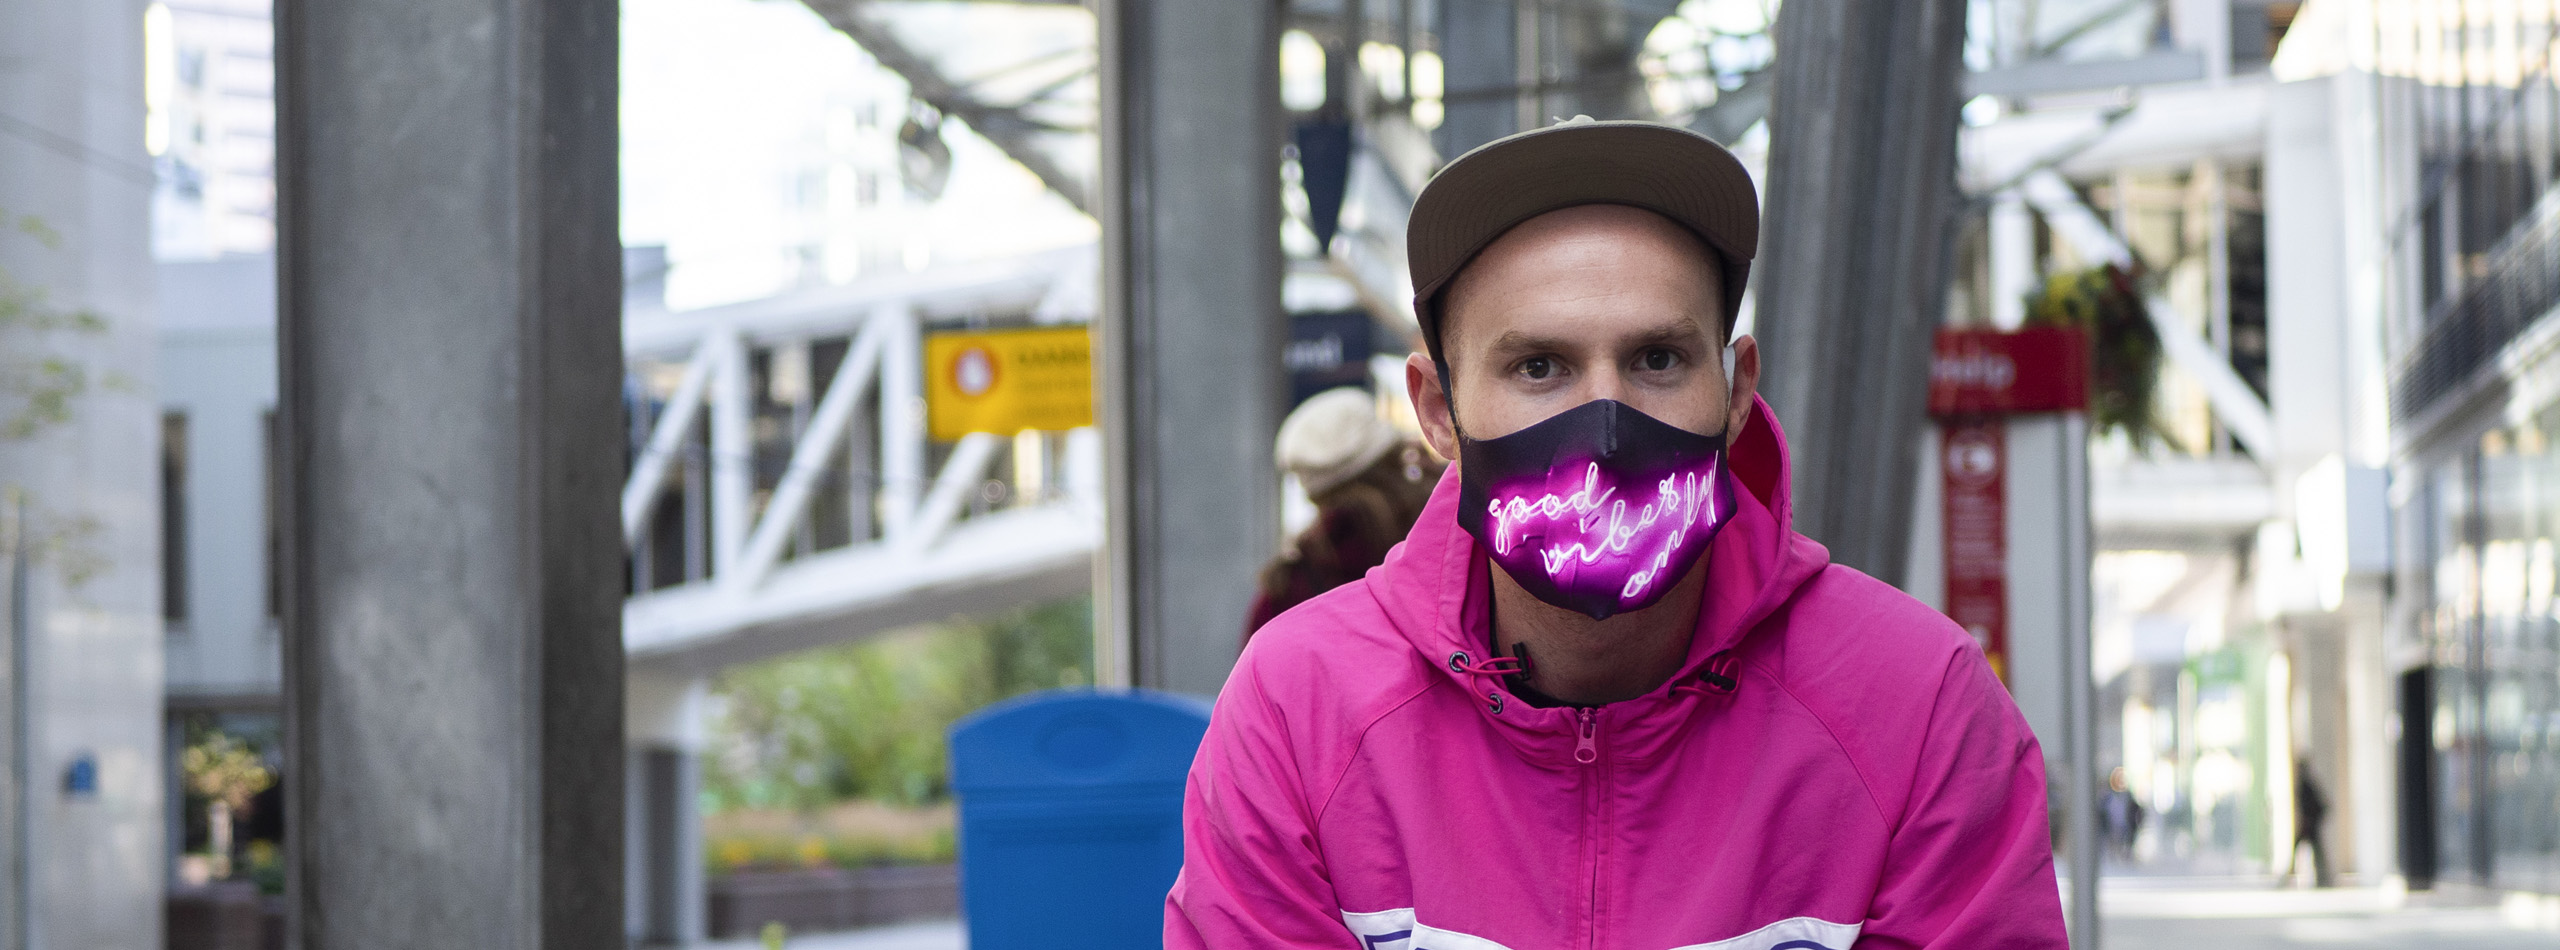 Man in city with custom printed face covering